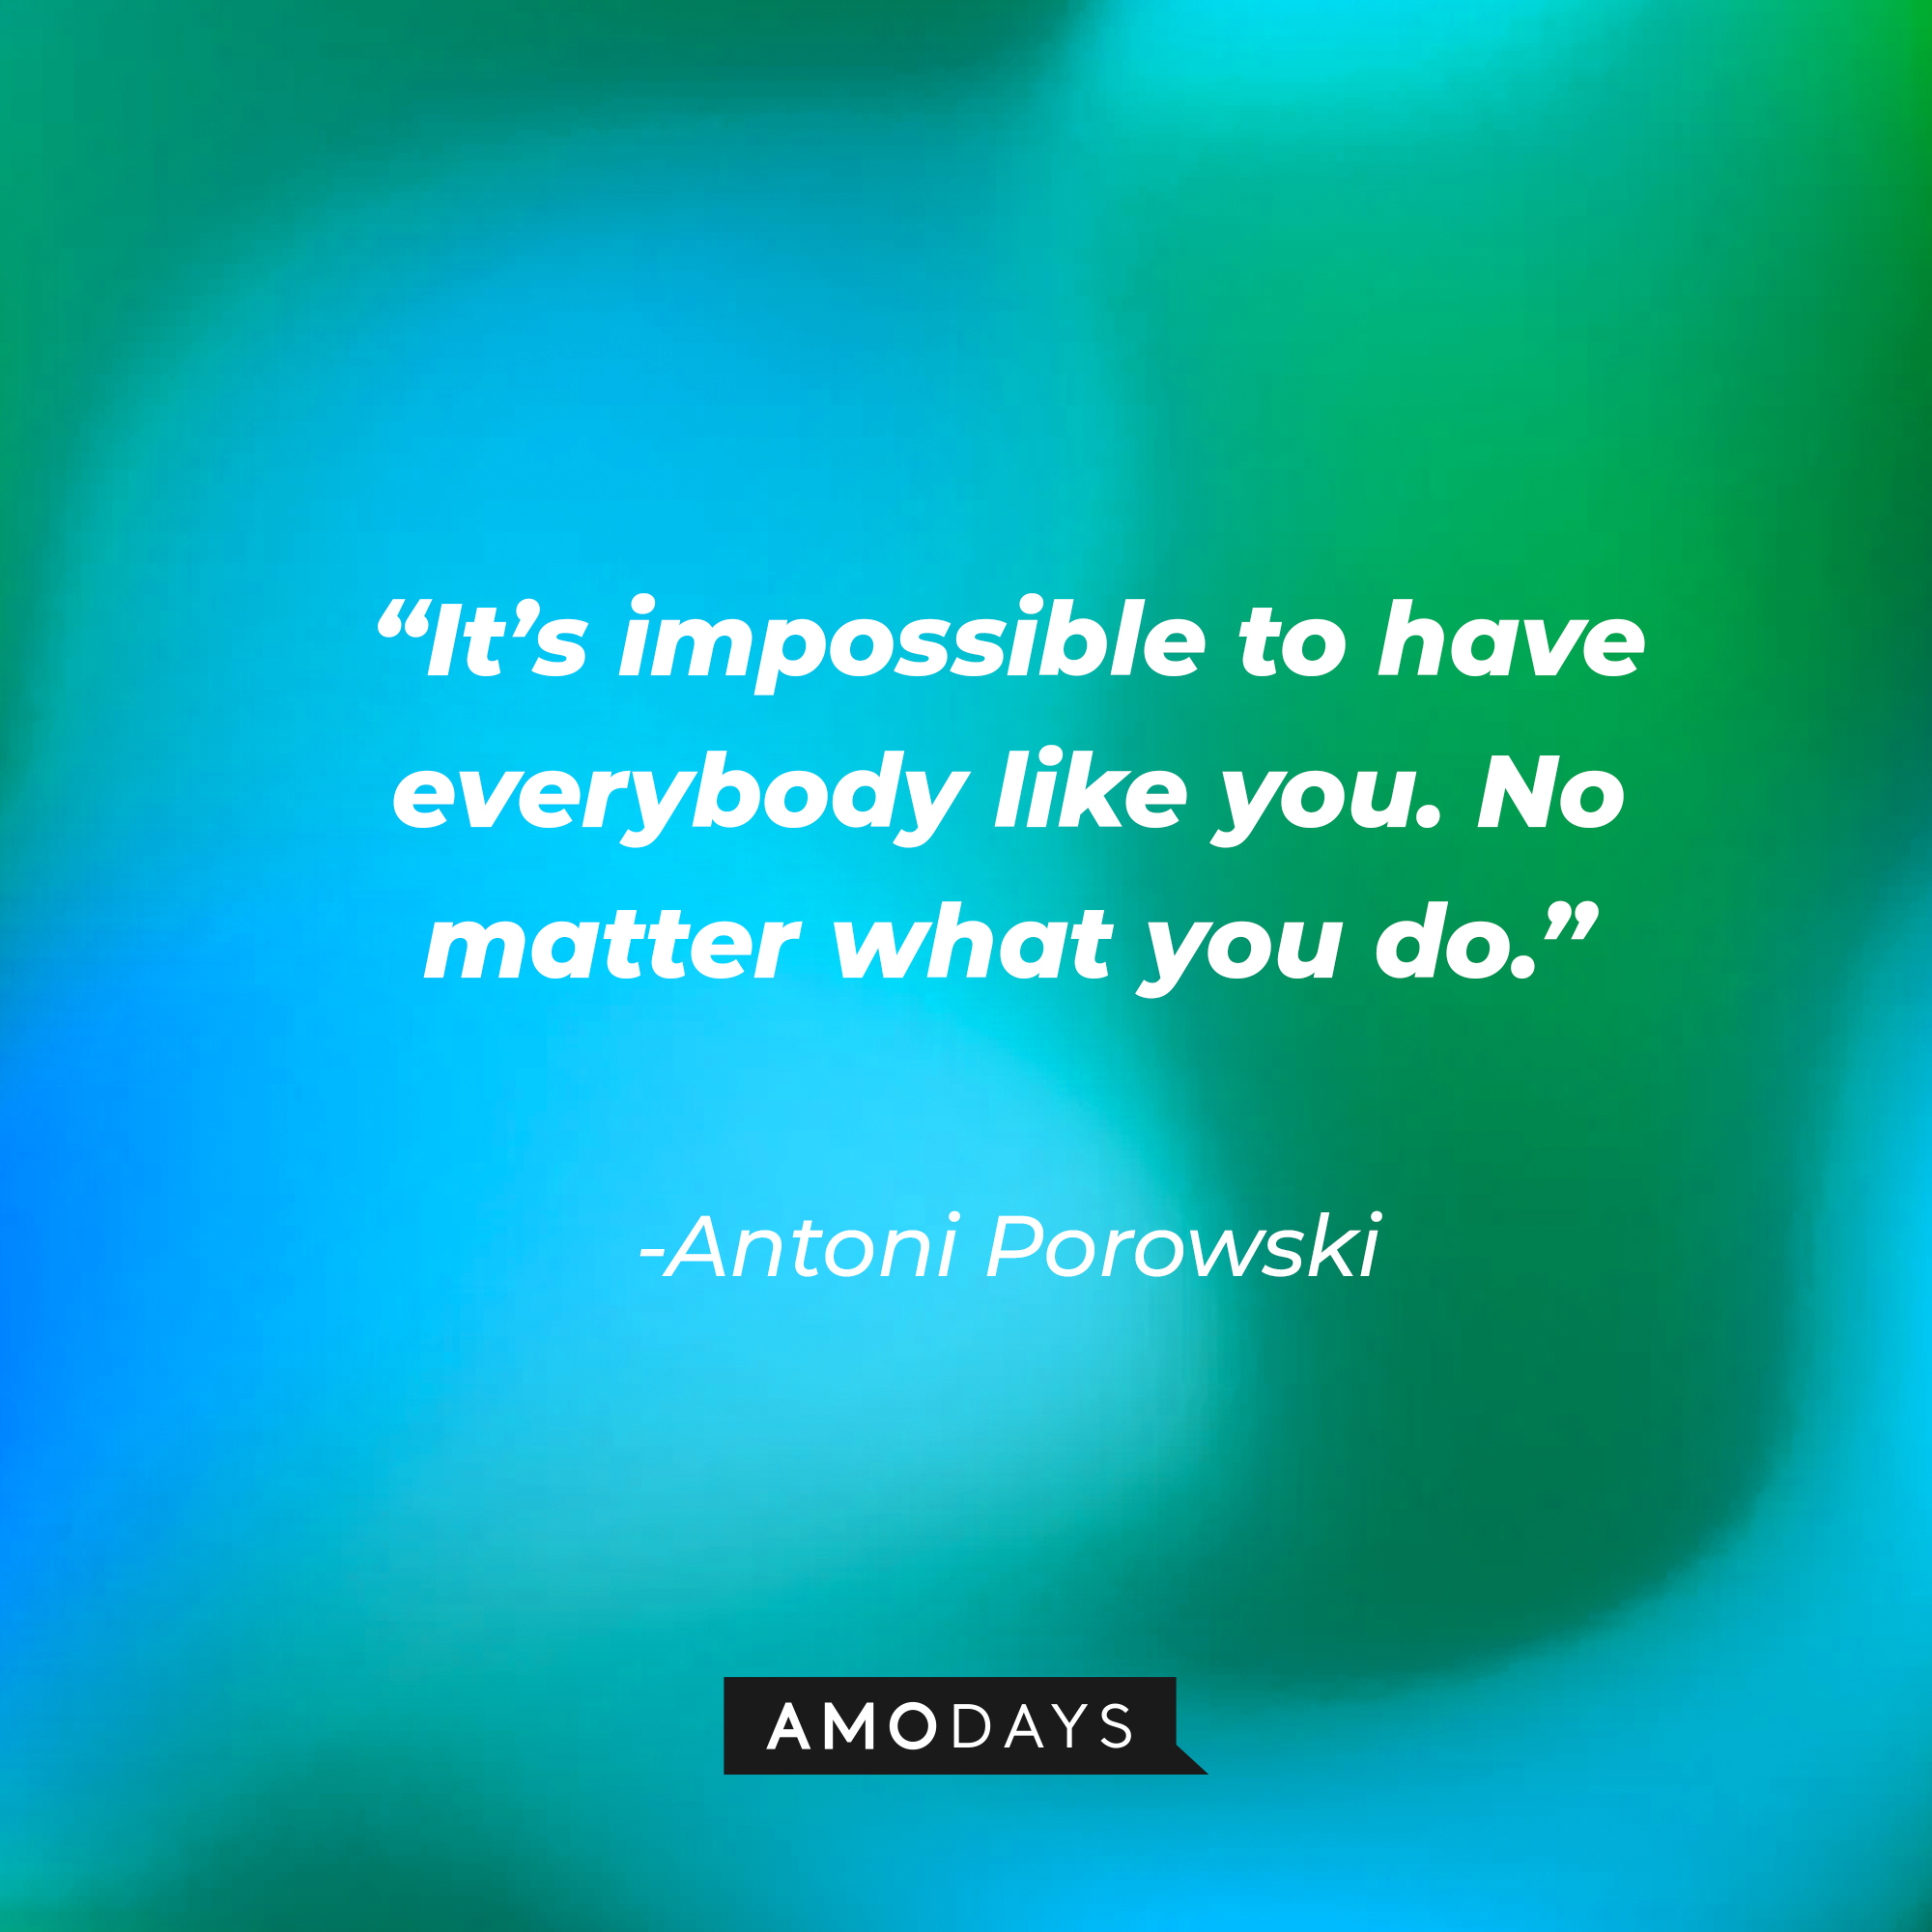 Antoni Porowski's quote: "It's impossible to have everybody like you. No matter what you do." | Source: Getty Images